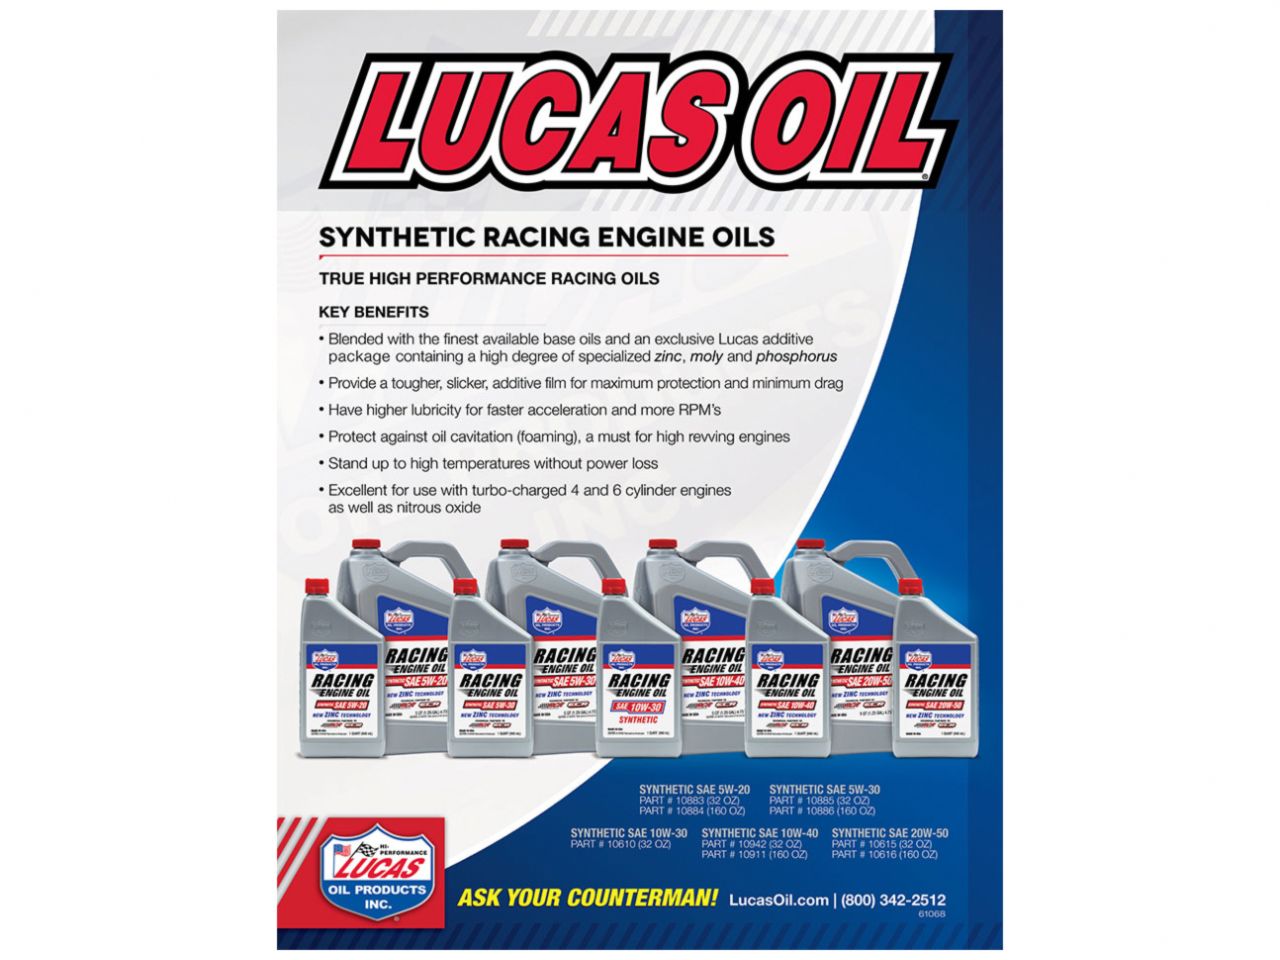 Lucas Oil 20W-50 Synthetic Racing Oil